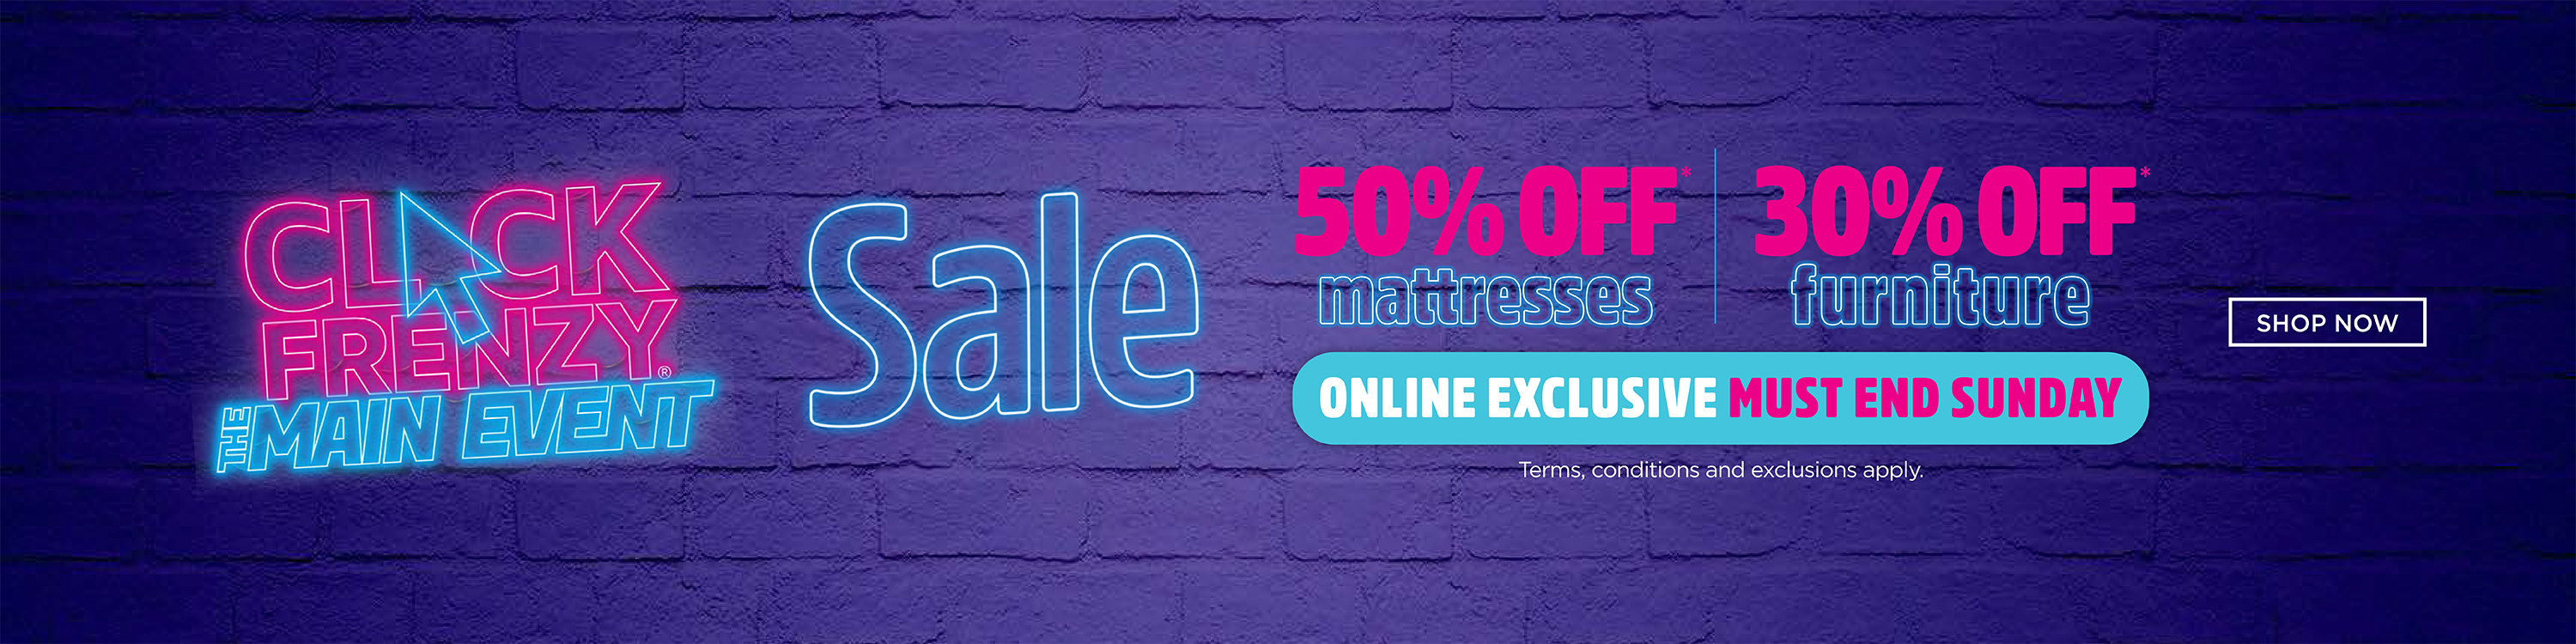 30-50% OFF mattresses, bedheads, furniture @ Forywinks Frenzy sale,